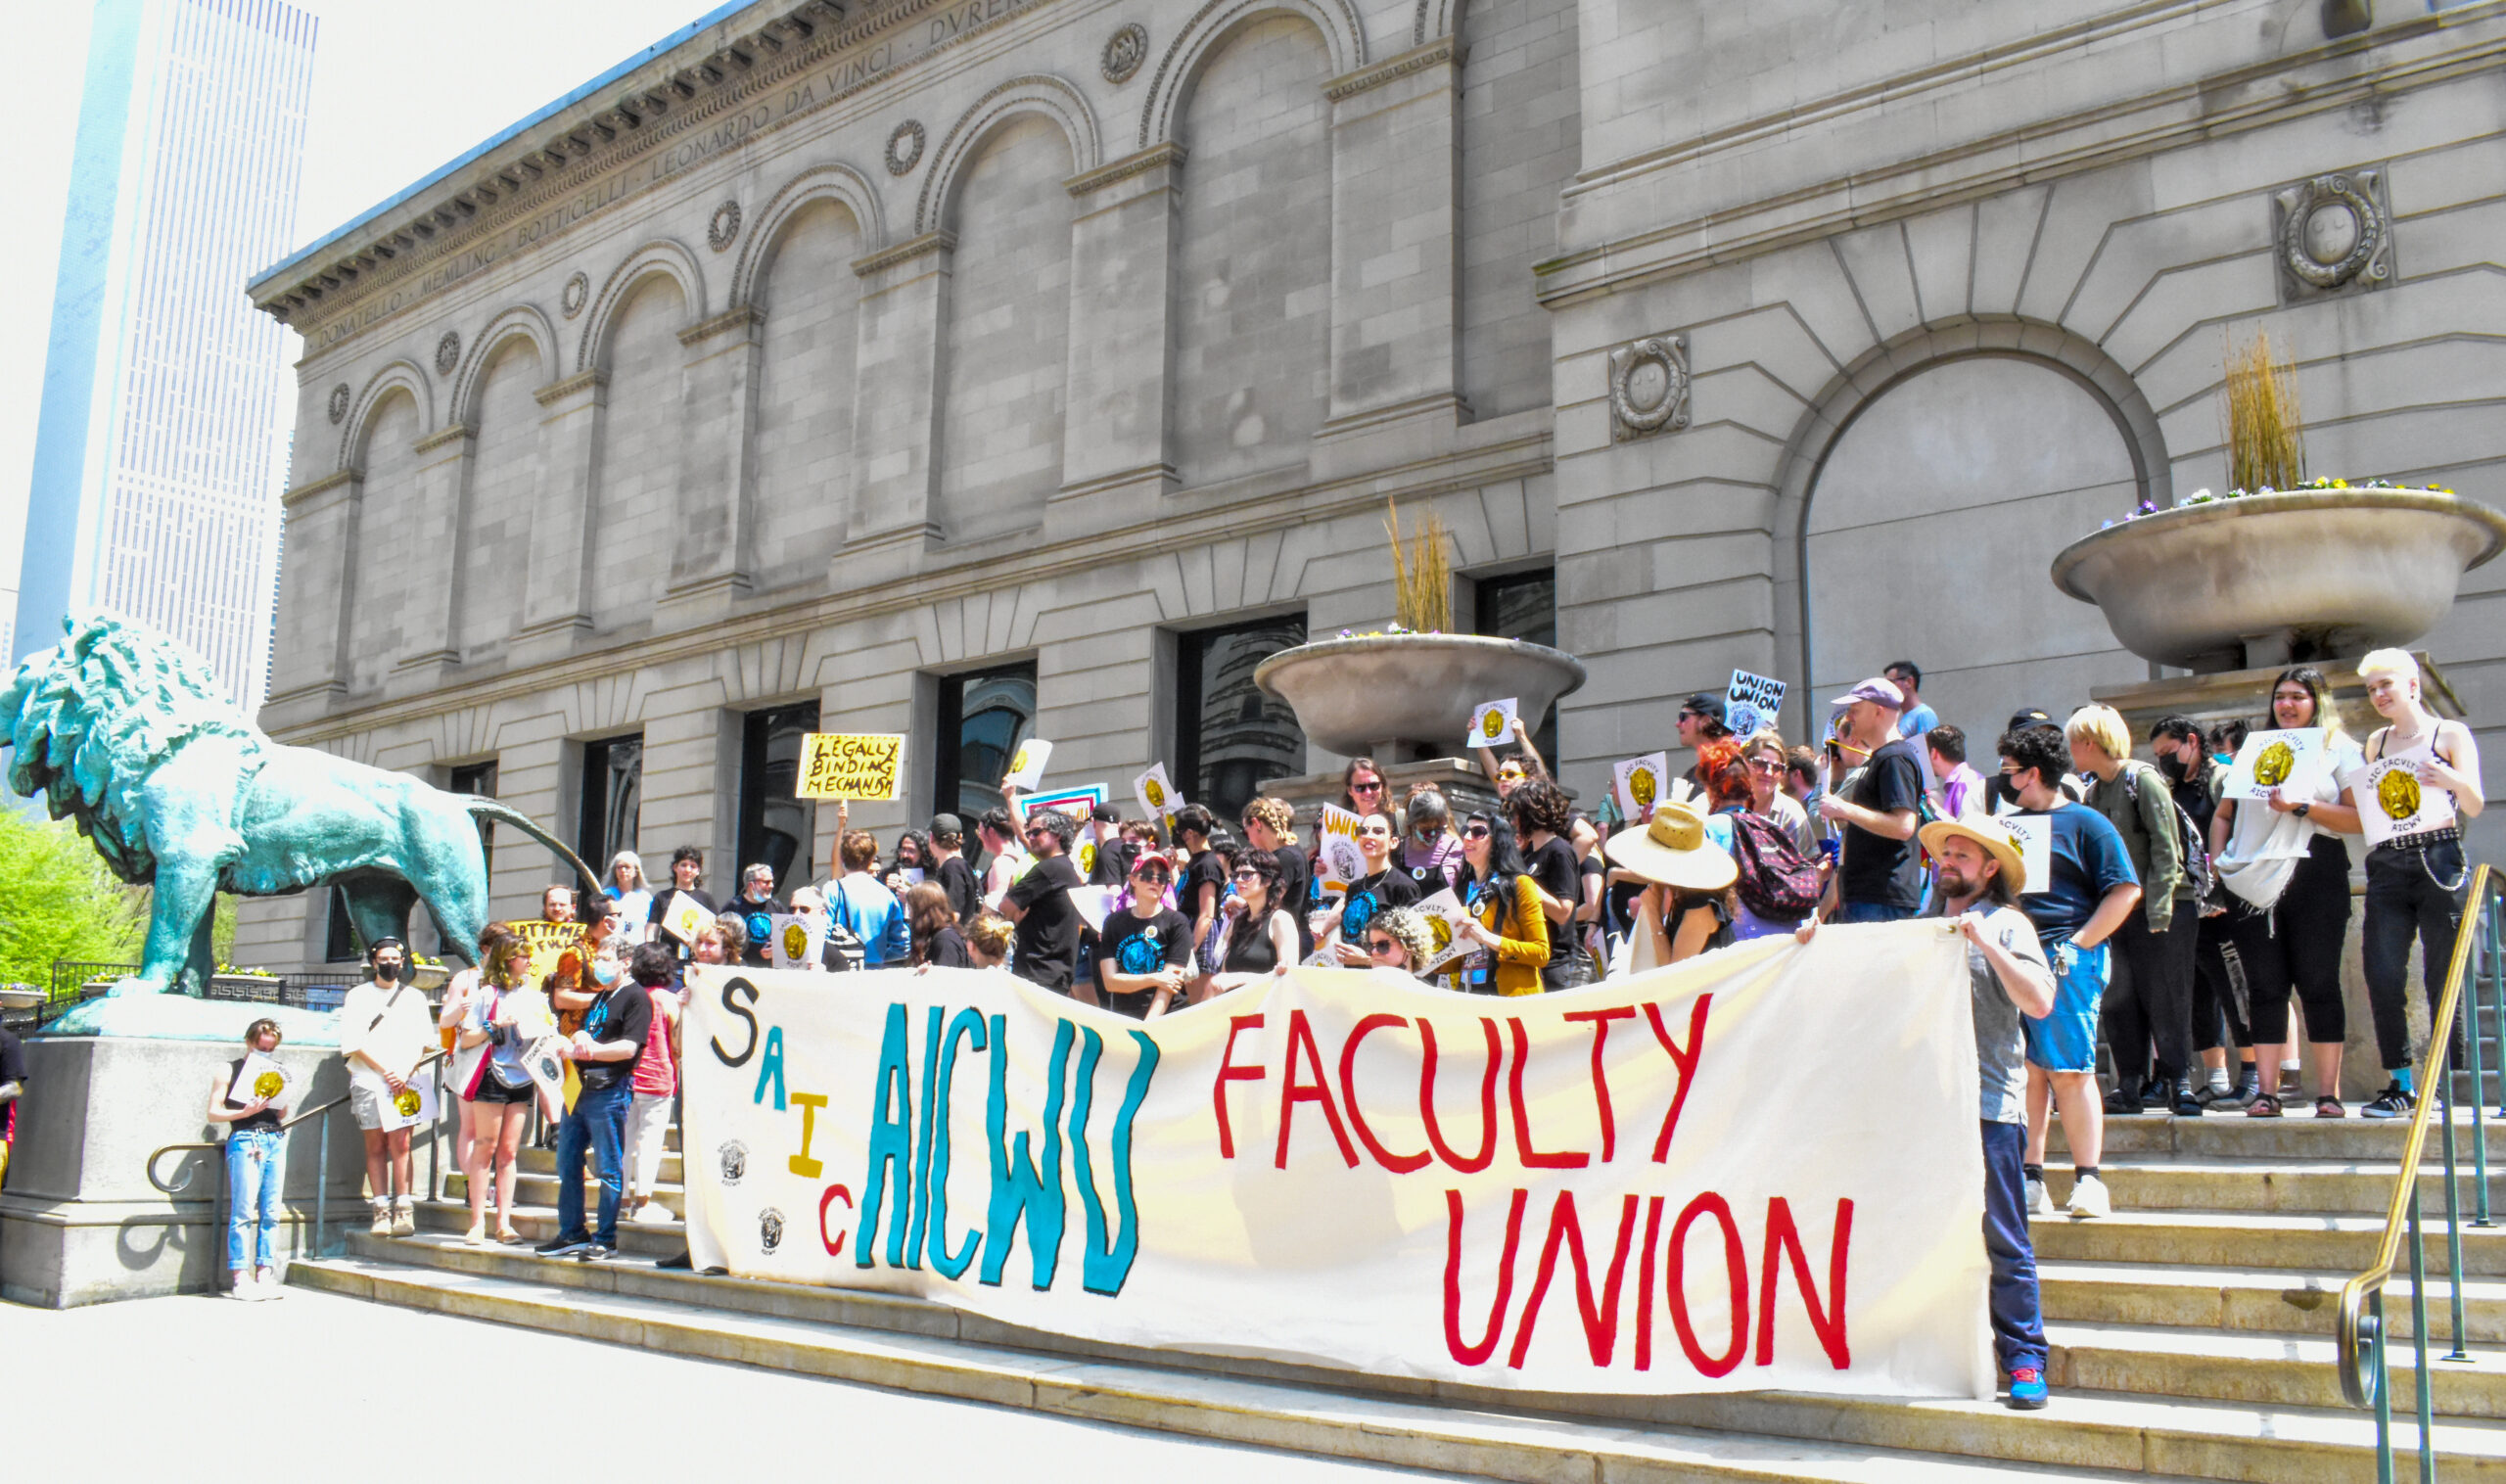 Dozens gather on the steps of the Art Institute with a banner that reads "SAIC AICWU Faculty Union."